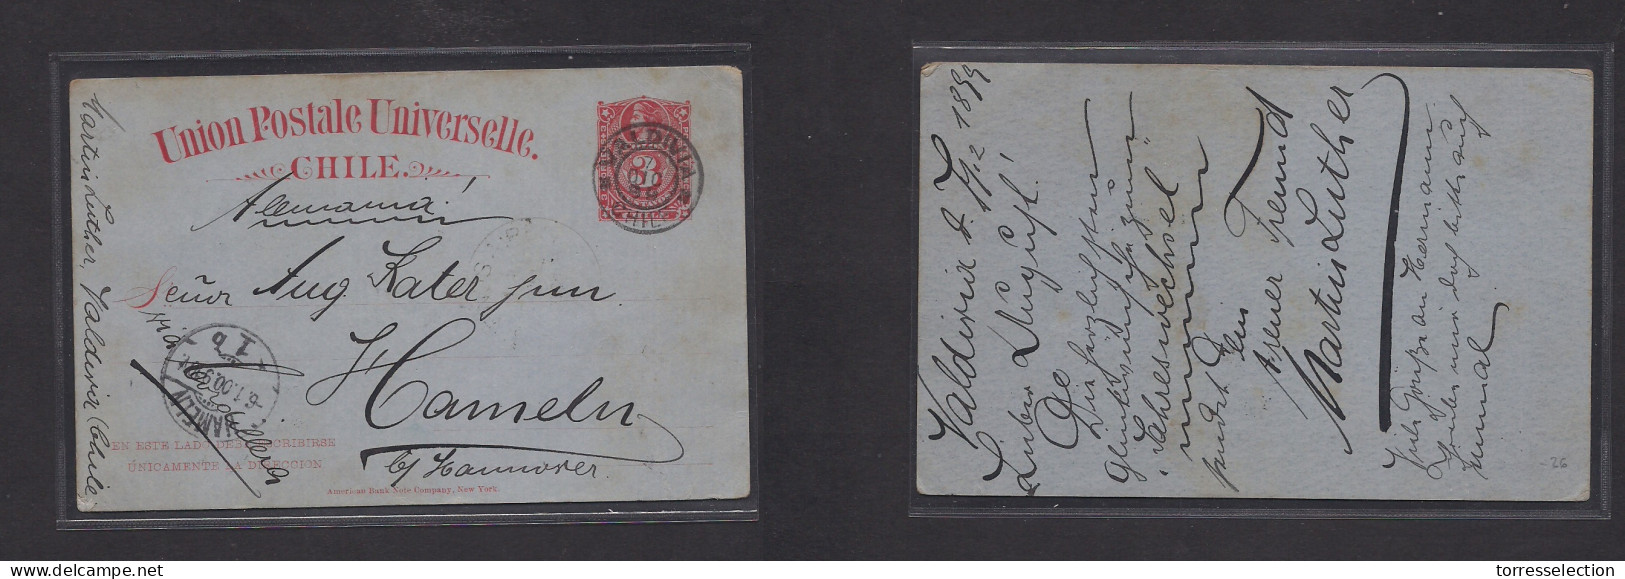 CHILE - Stationery. 1899 (7 Dic) Valdivia - Germany, Hamelin (6 Jan 1900) 3c Red Stat Card. Fine Used. - Cile